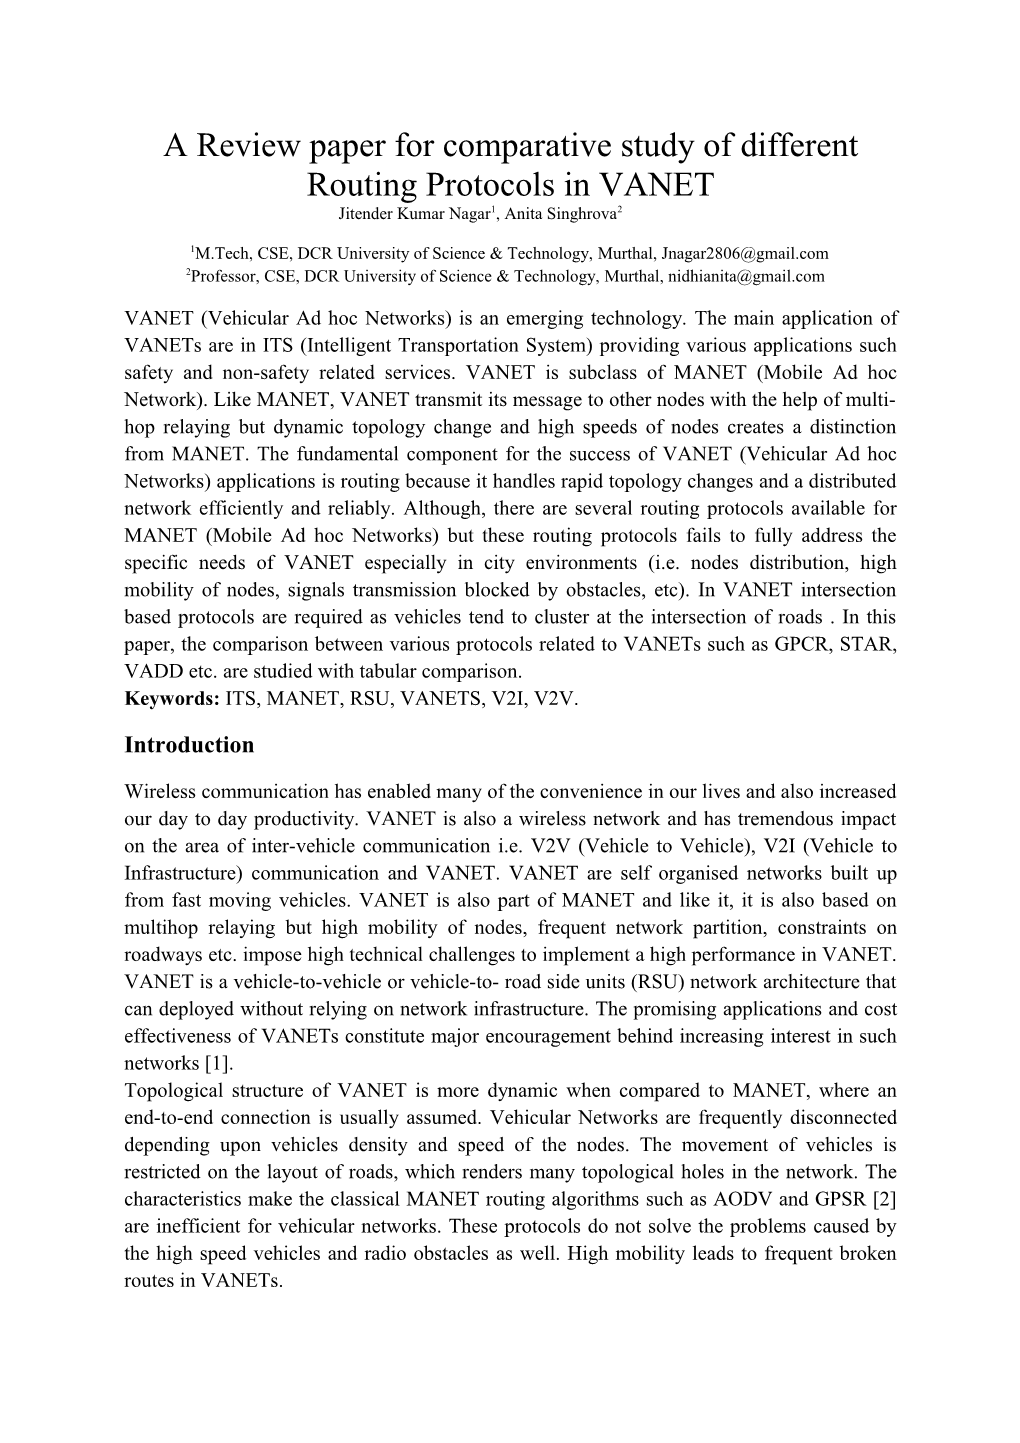 A Review Paper for Comparative Study of Different Routing Protocols in VANET